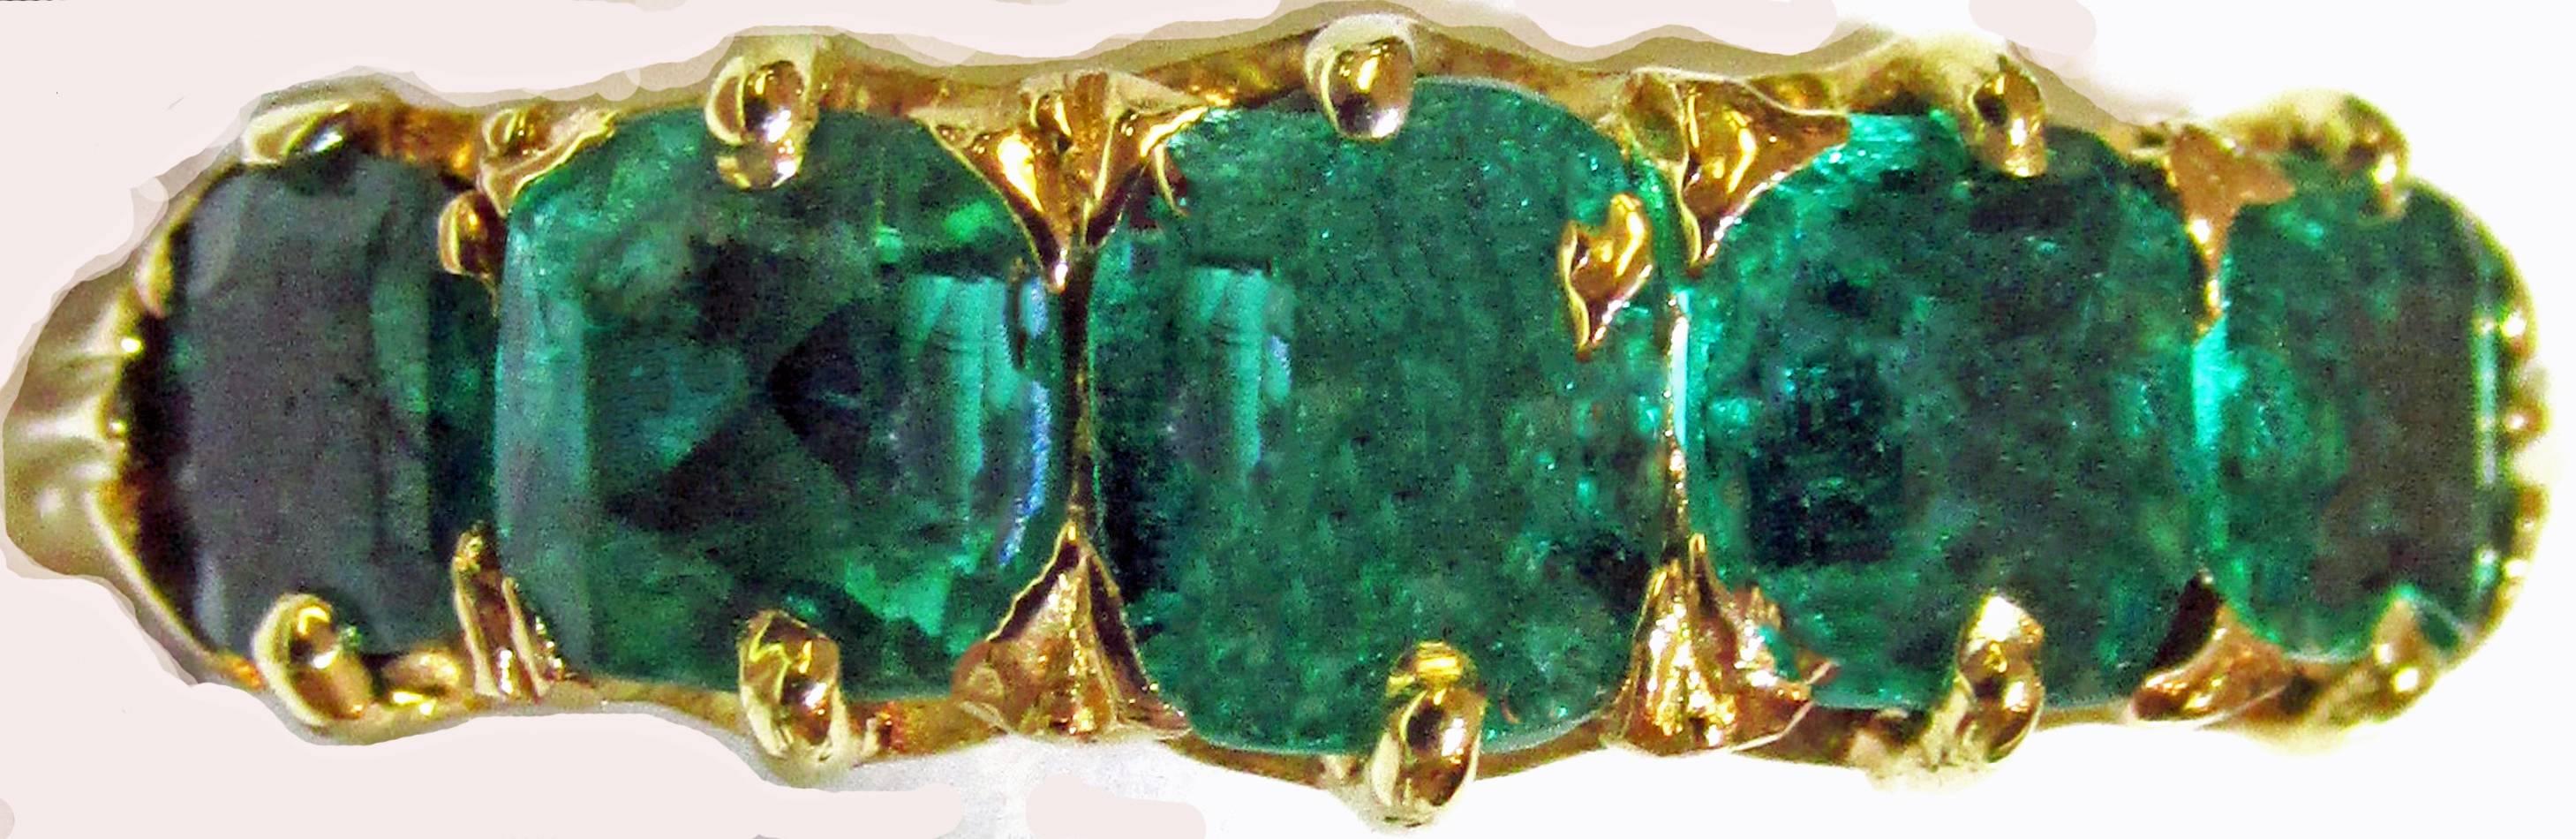 Classical early Victorian five stone emerald ring set in 18K gold, c1850.  Five stone rings were popular in the Victorian era.  Lovely to wear stacked with a gold band or other gemstone rings. The ring is a size 5 1/4.